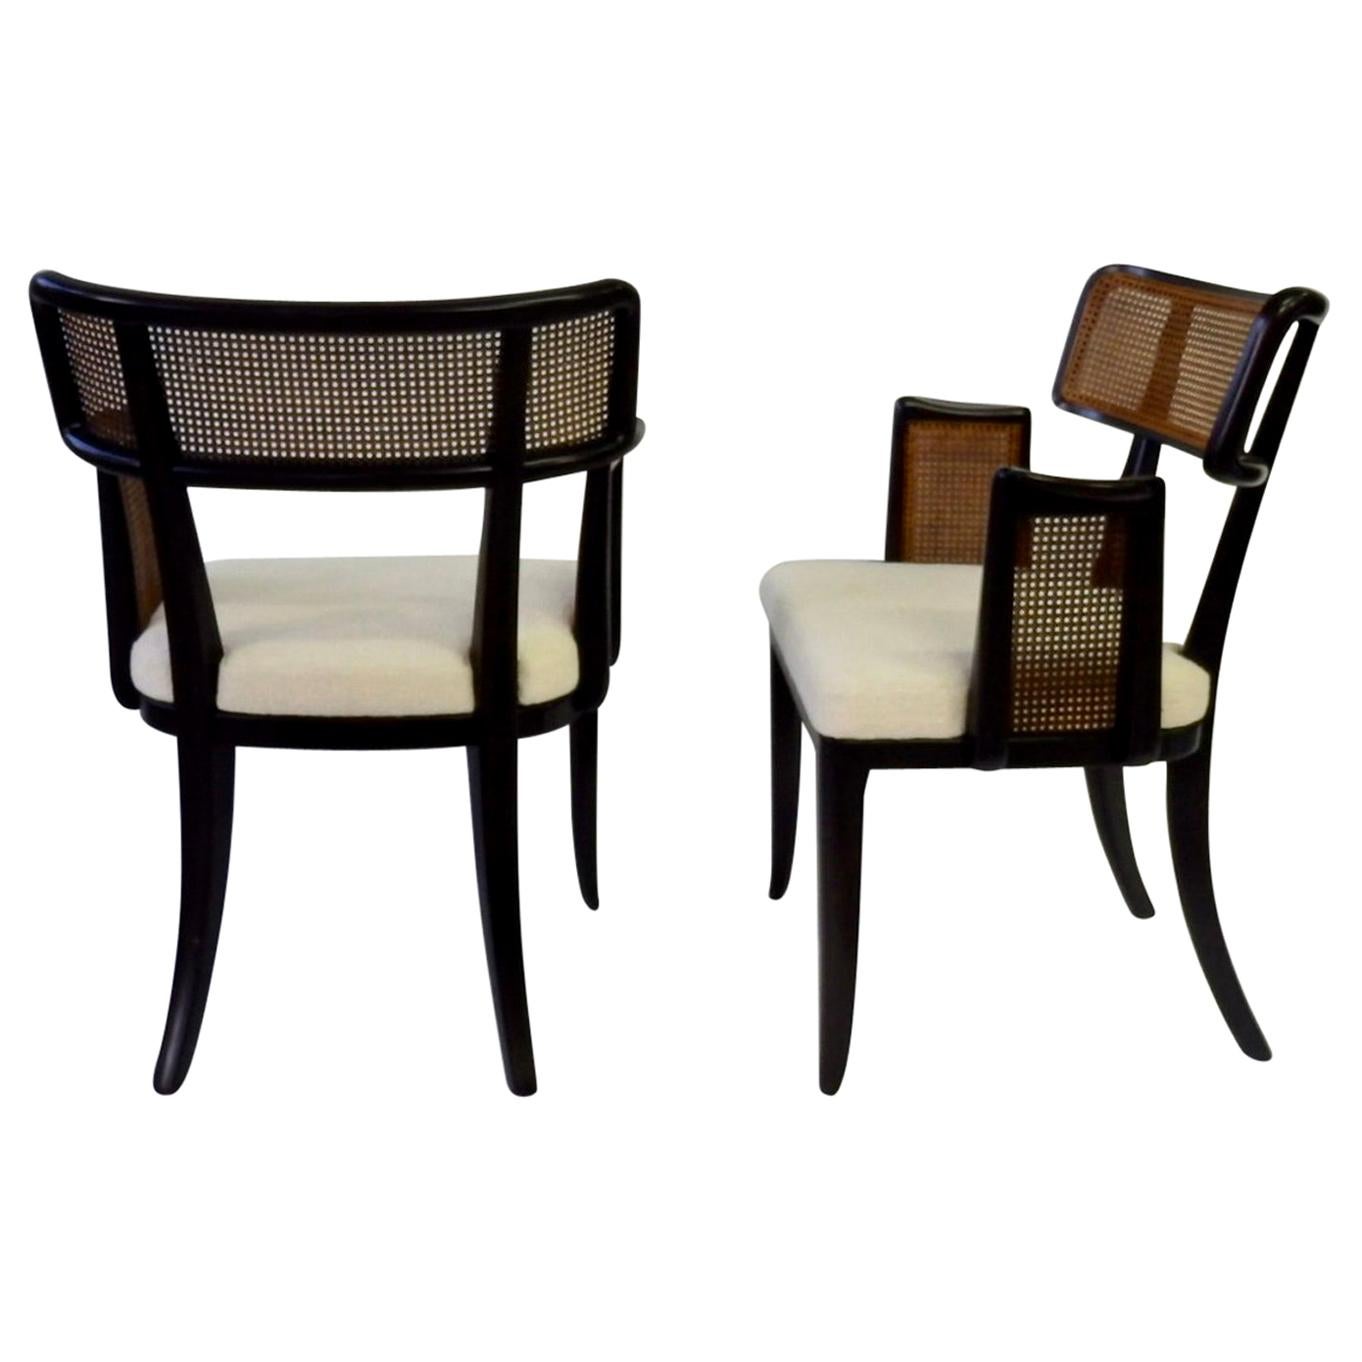 Rare Pair of Edward Wormley for Dunbar Caneback Side Chairs